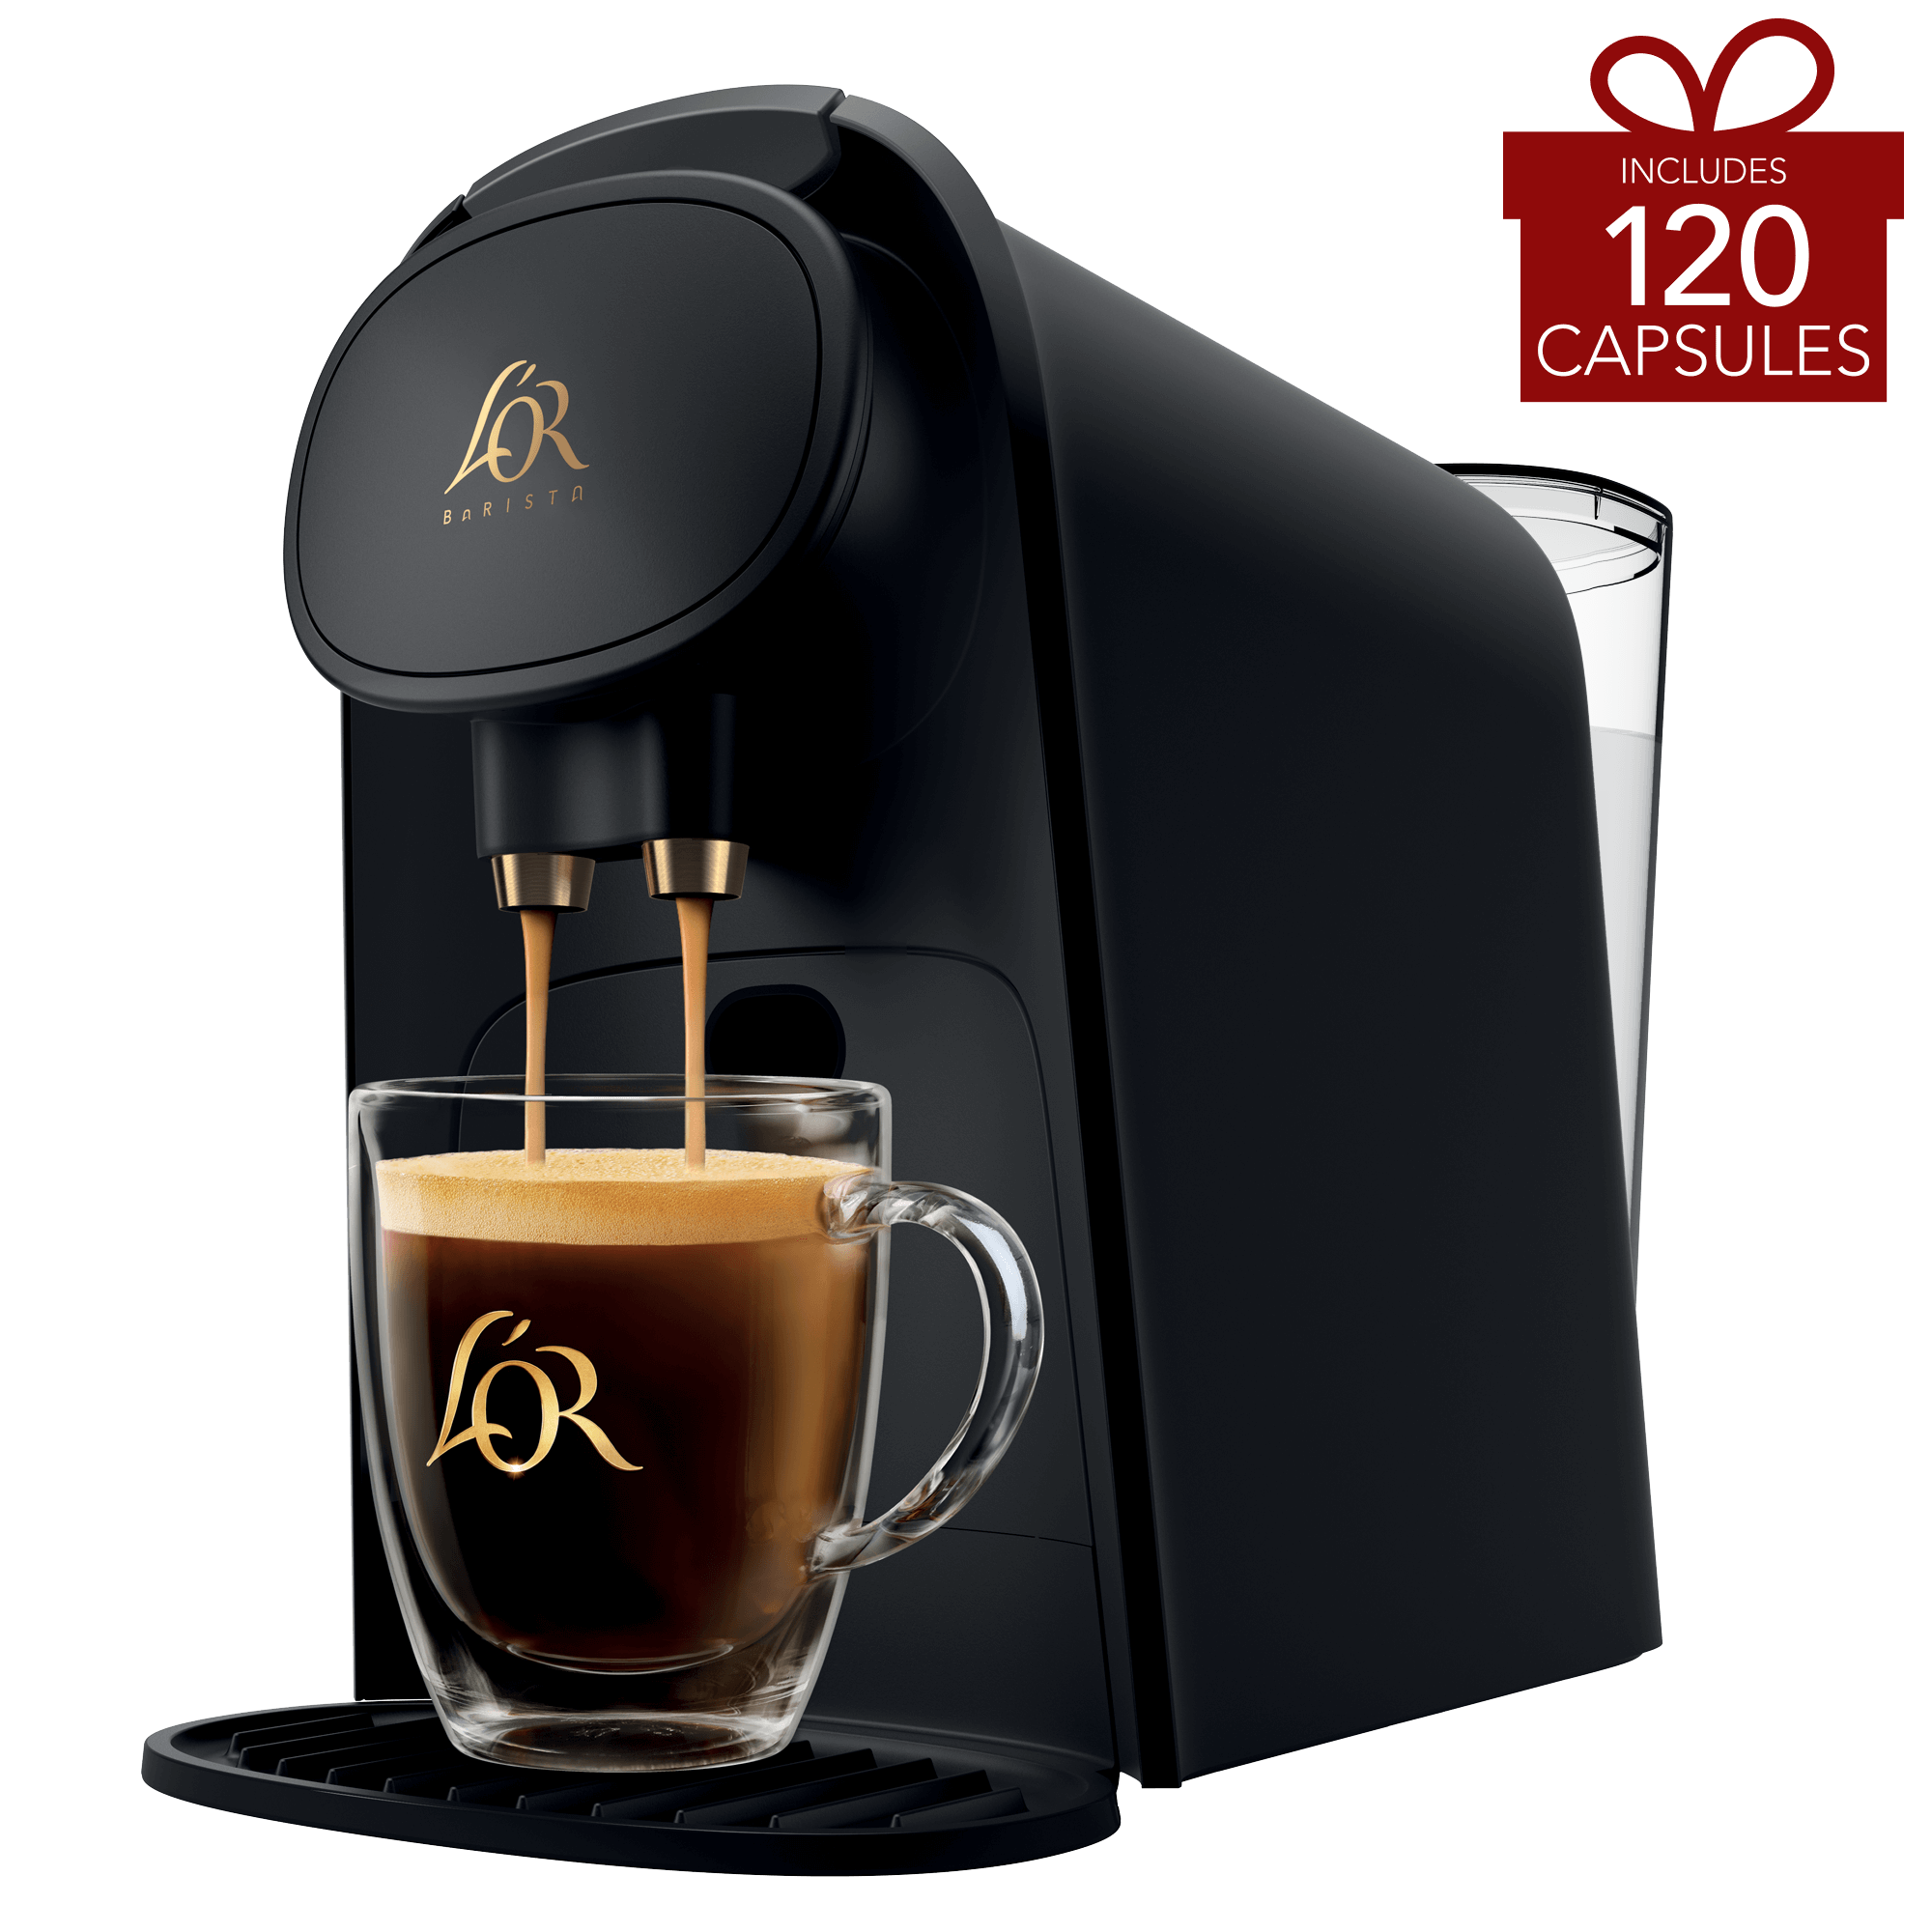 Image of L'OR BARISTA 120 Capsule Holiday Bundle